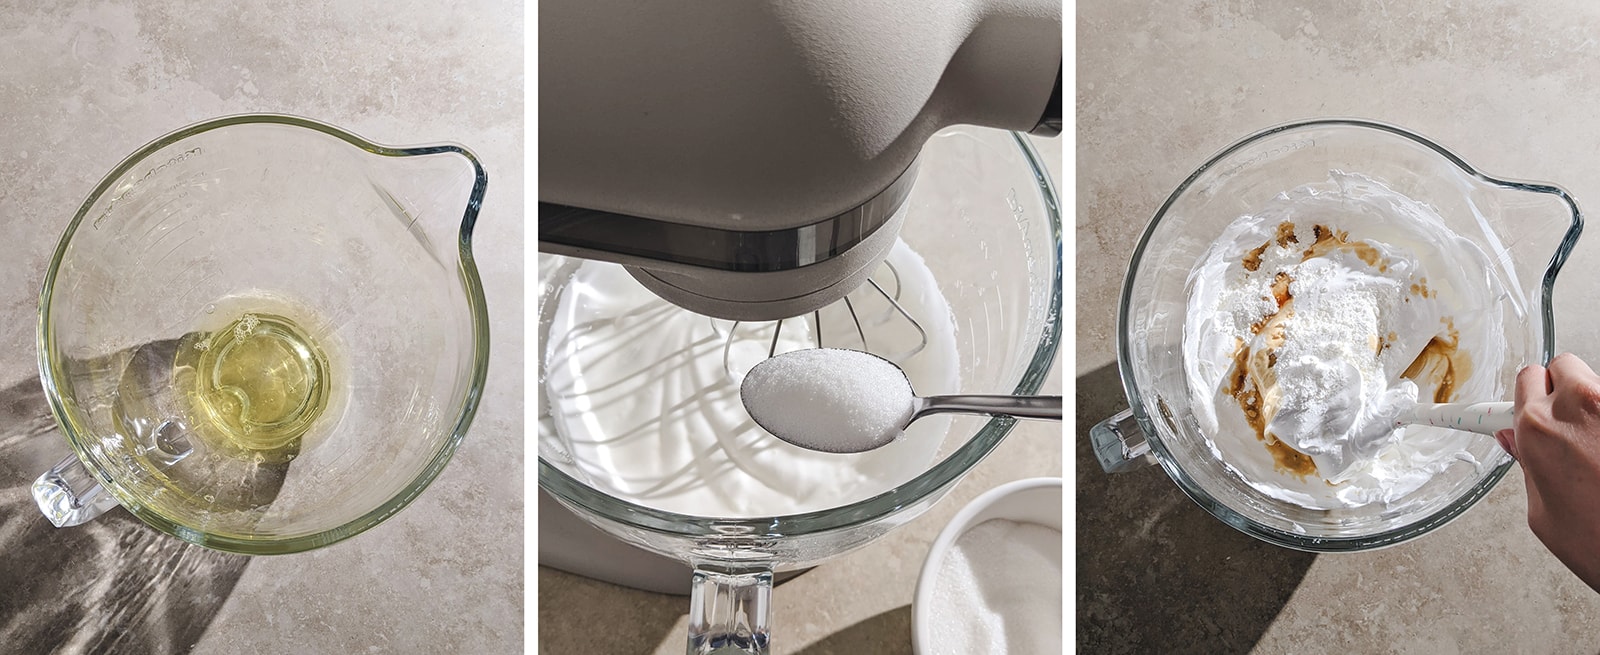 whipping meringue from egg whites in a stand mixer